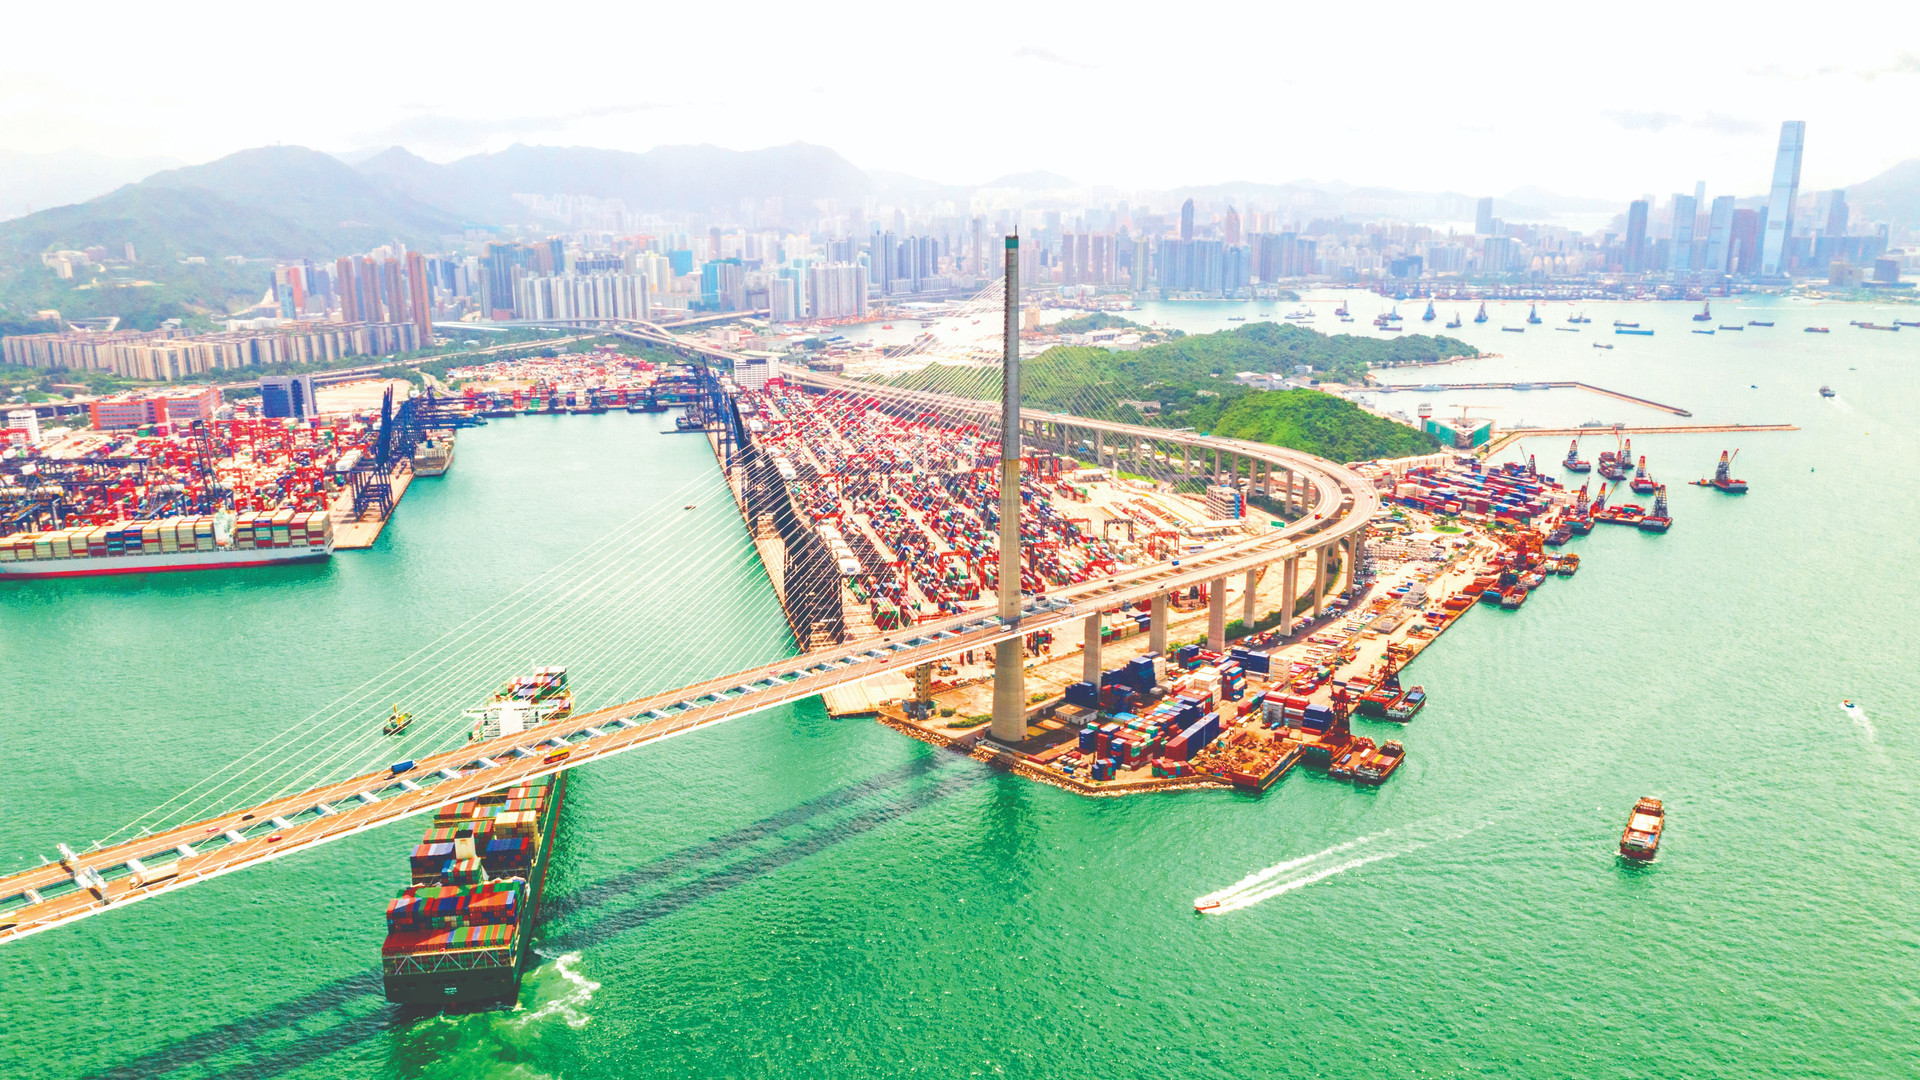 hong-kong-port-industrial-district-with-cargo-container-ship-stonecutters-bridge-compressed.jpeg